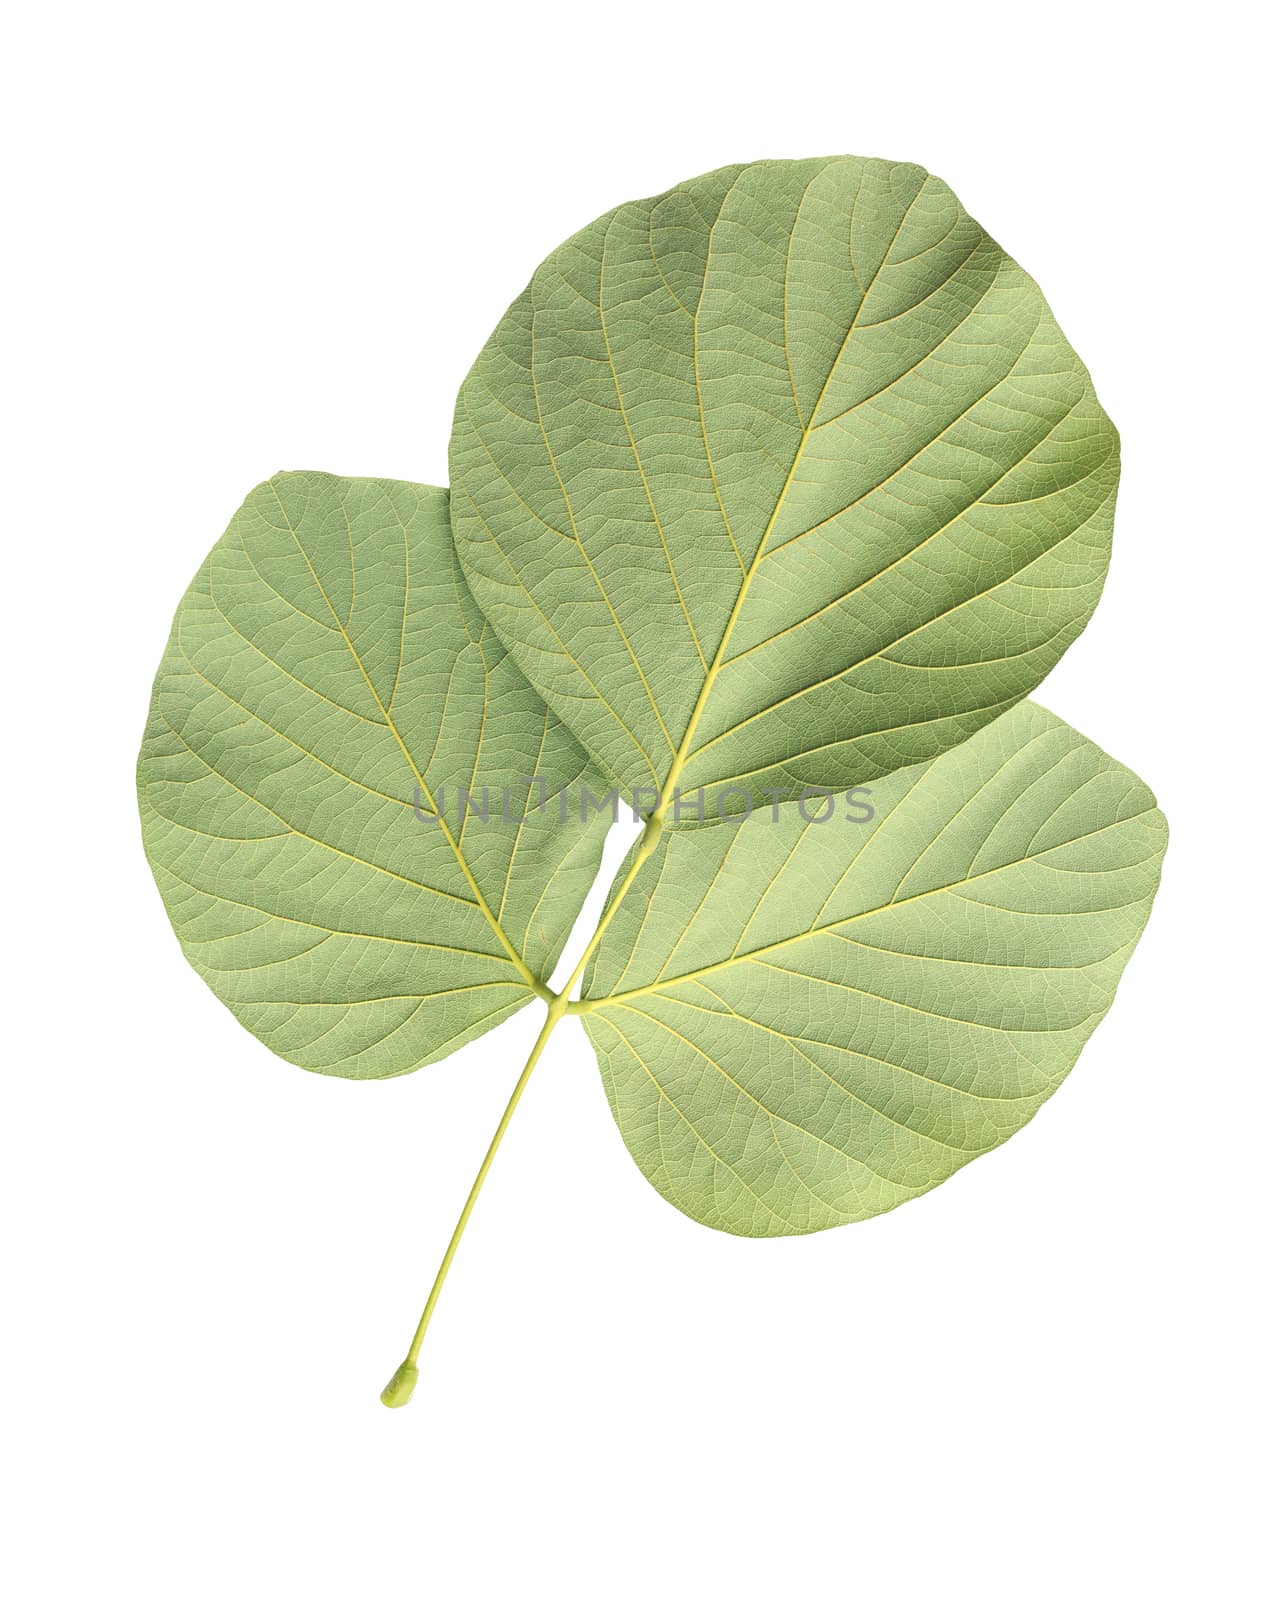 Tree leaf isolated on white on white background by nanDphanuwat